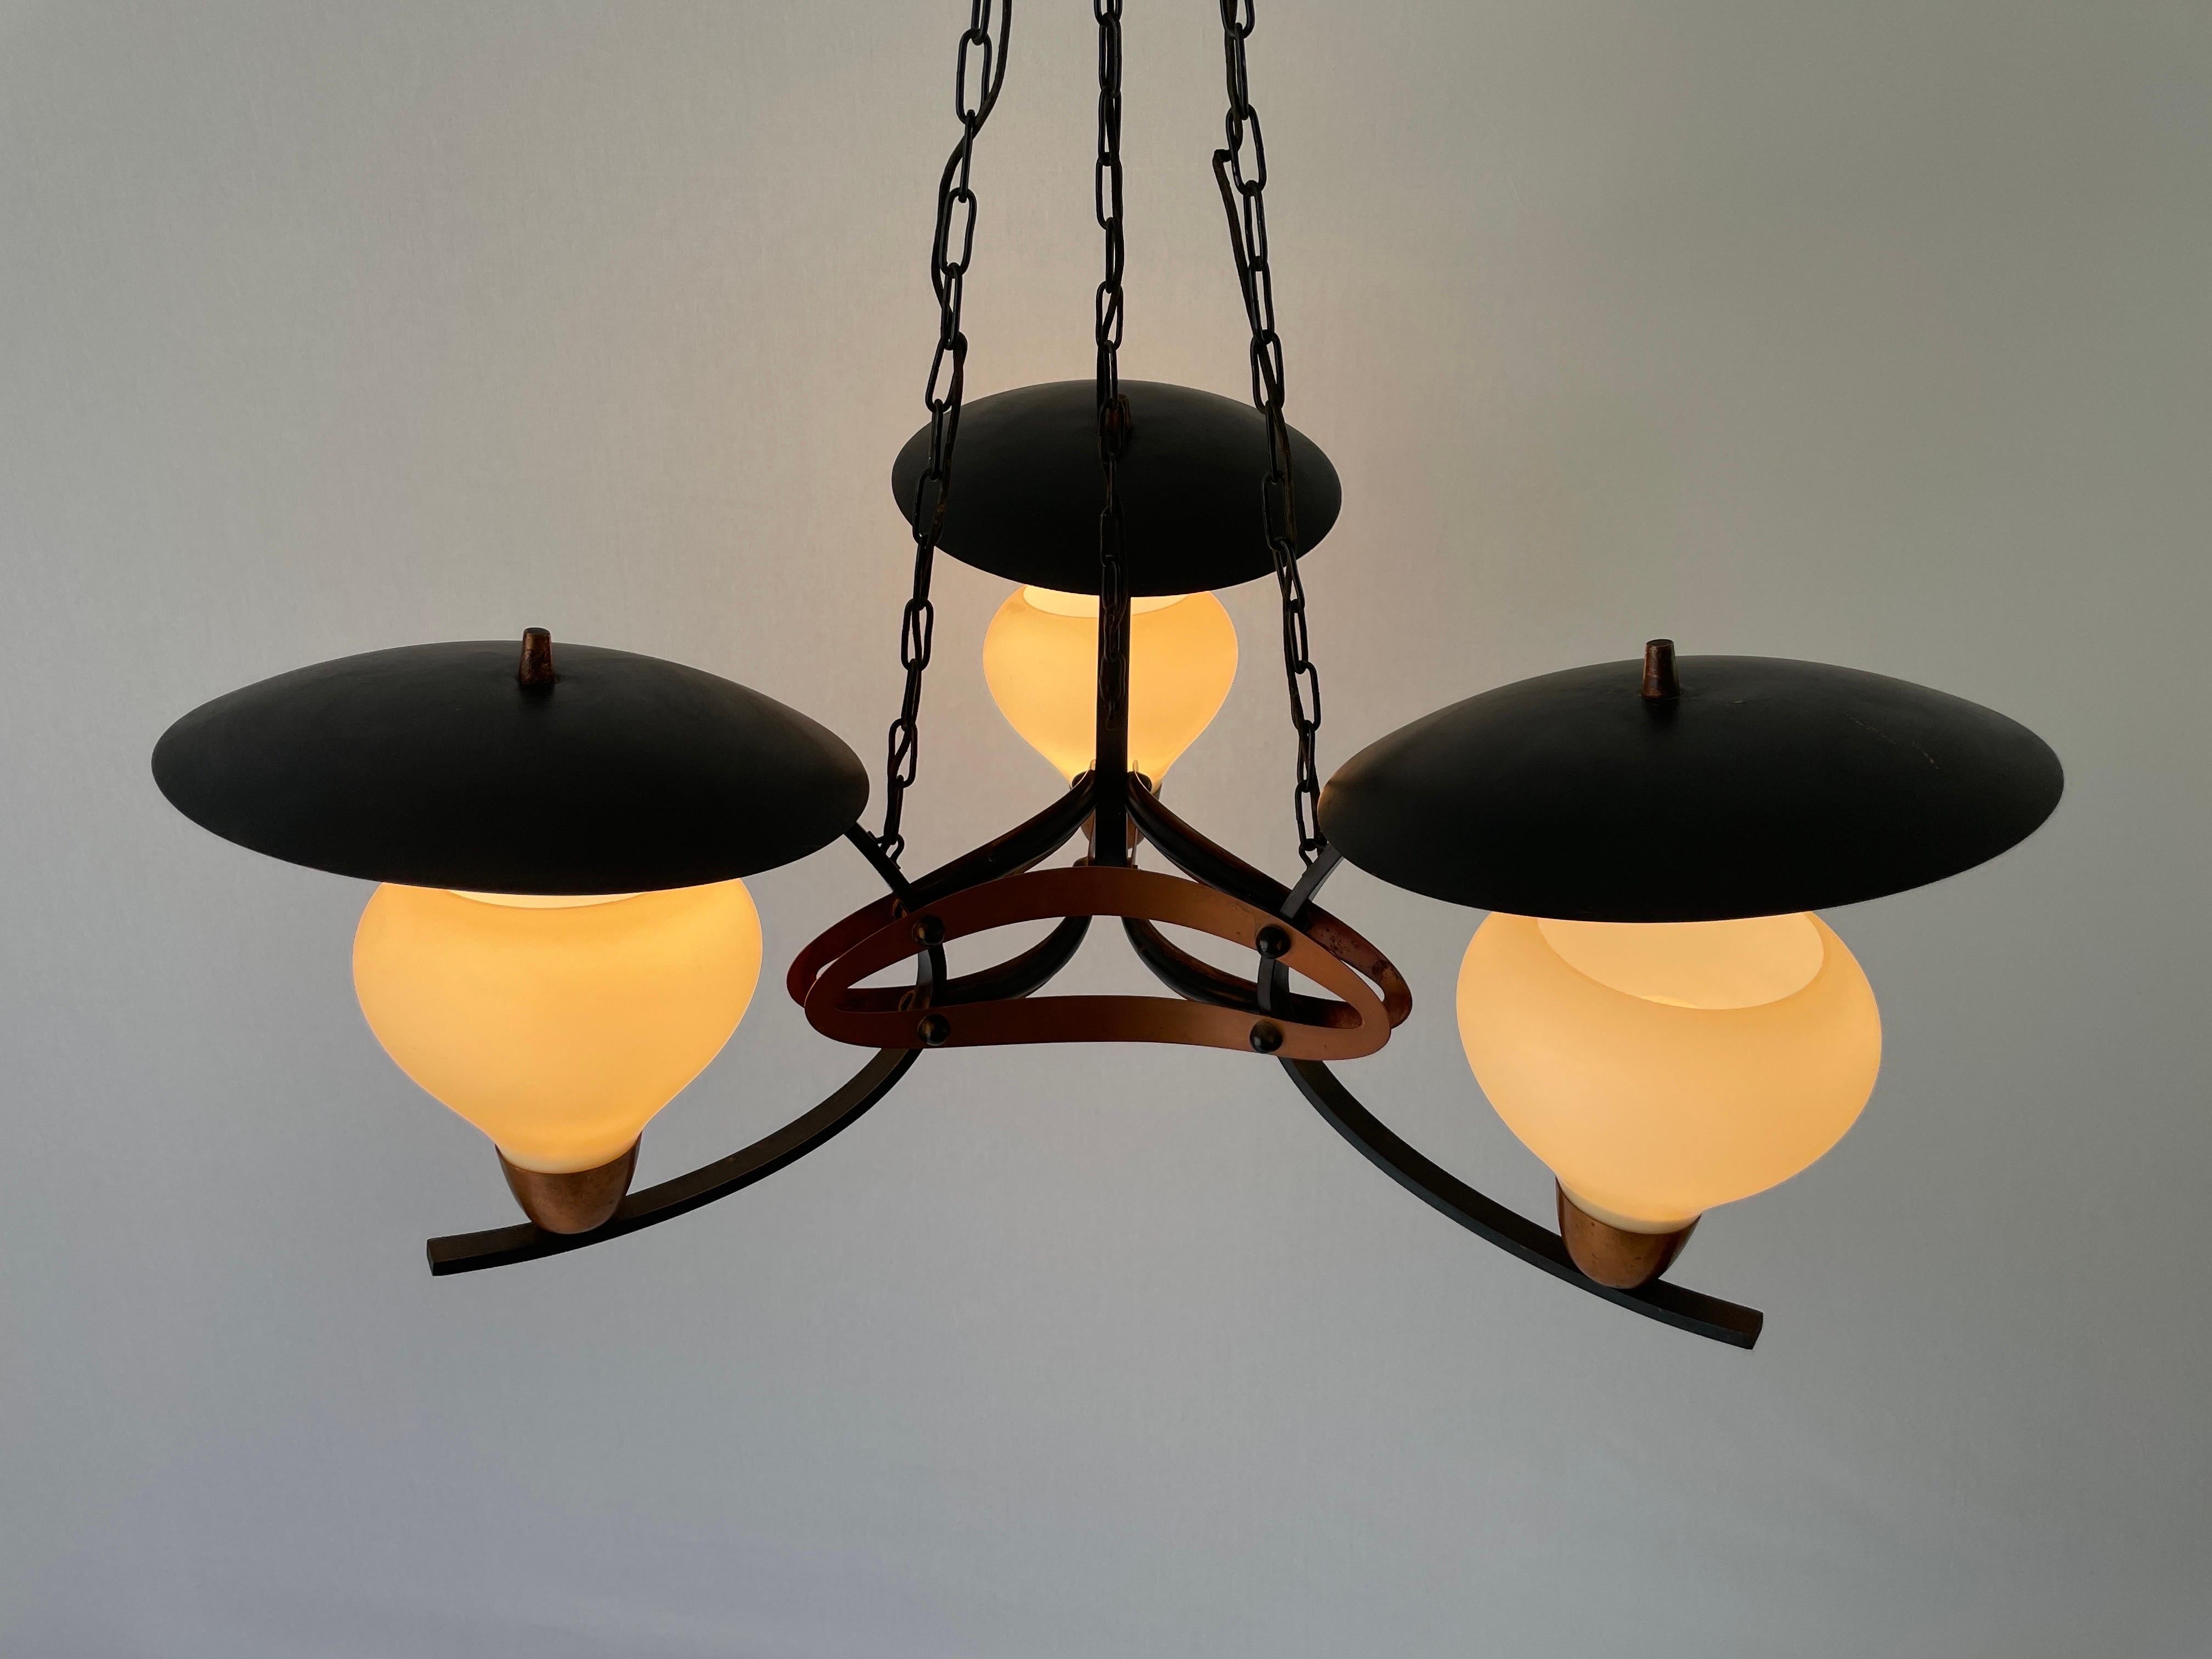 3-armed Glass and Copper Black Metal Chandelier, 1960s, Germany For Sale 6